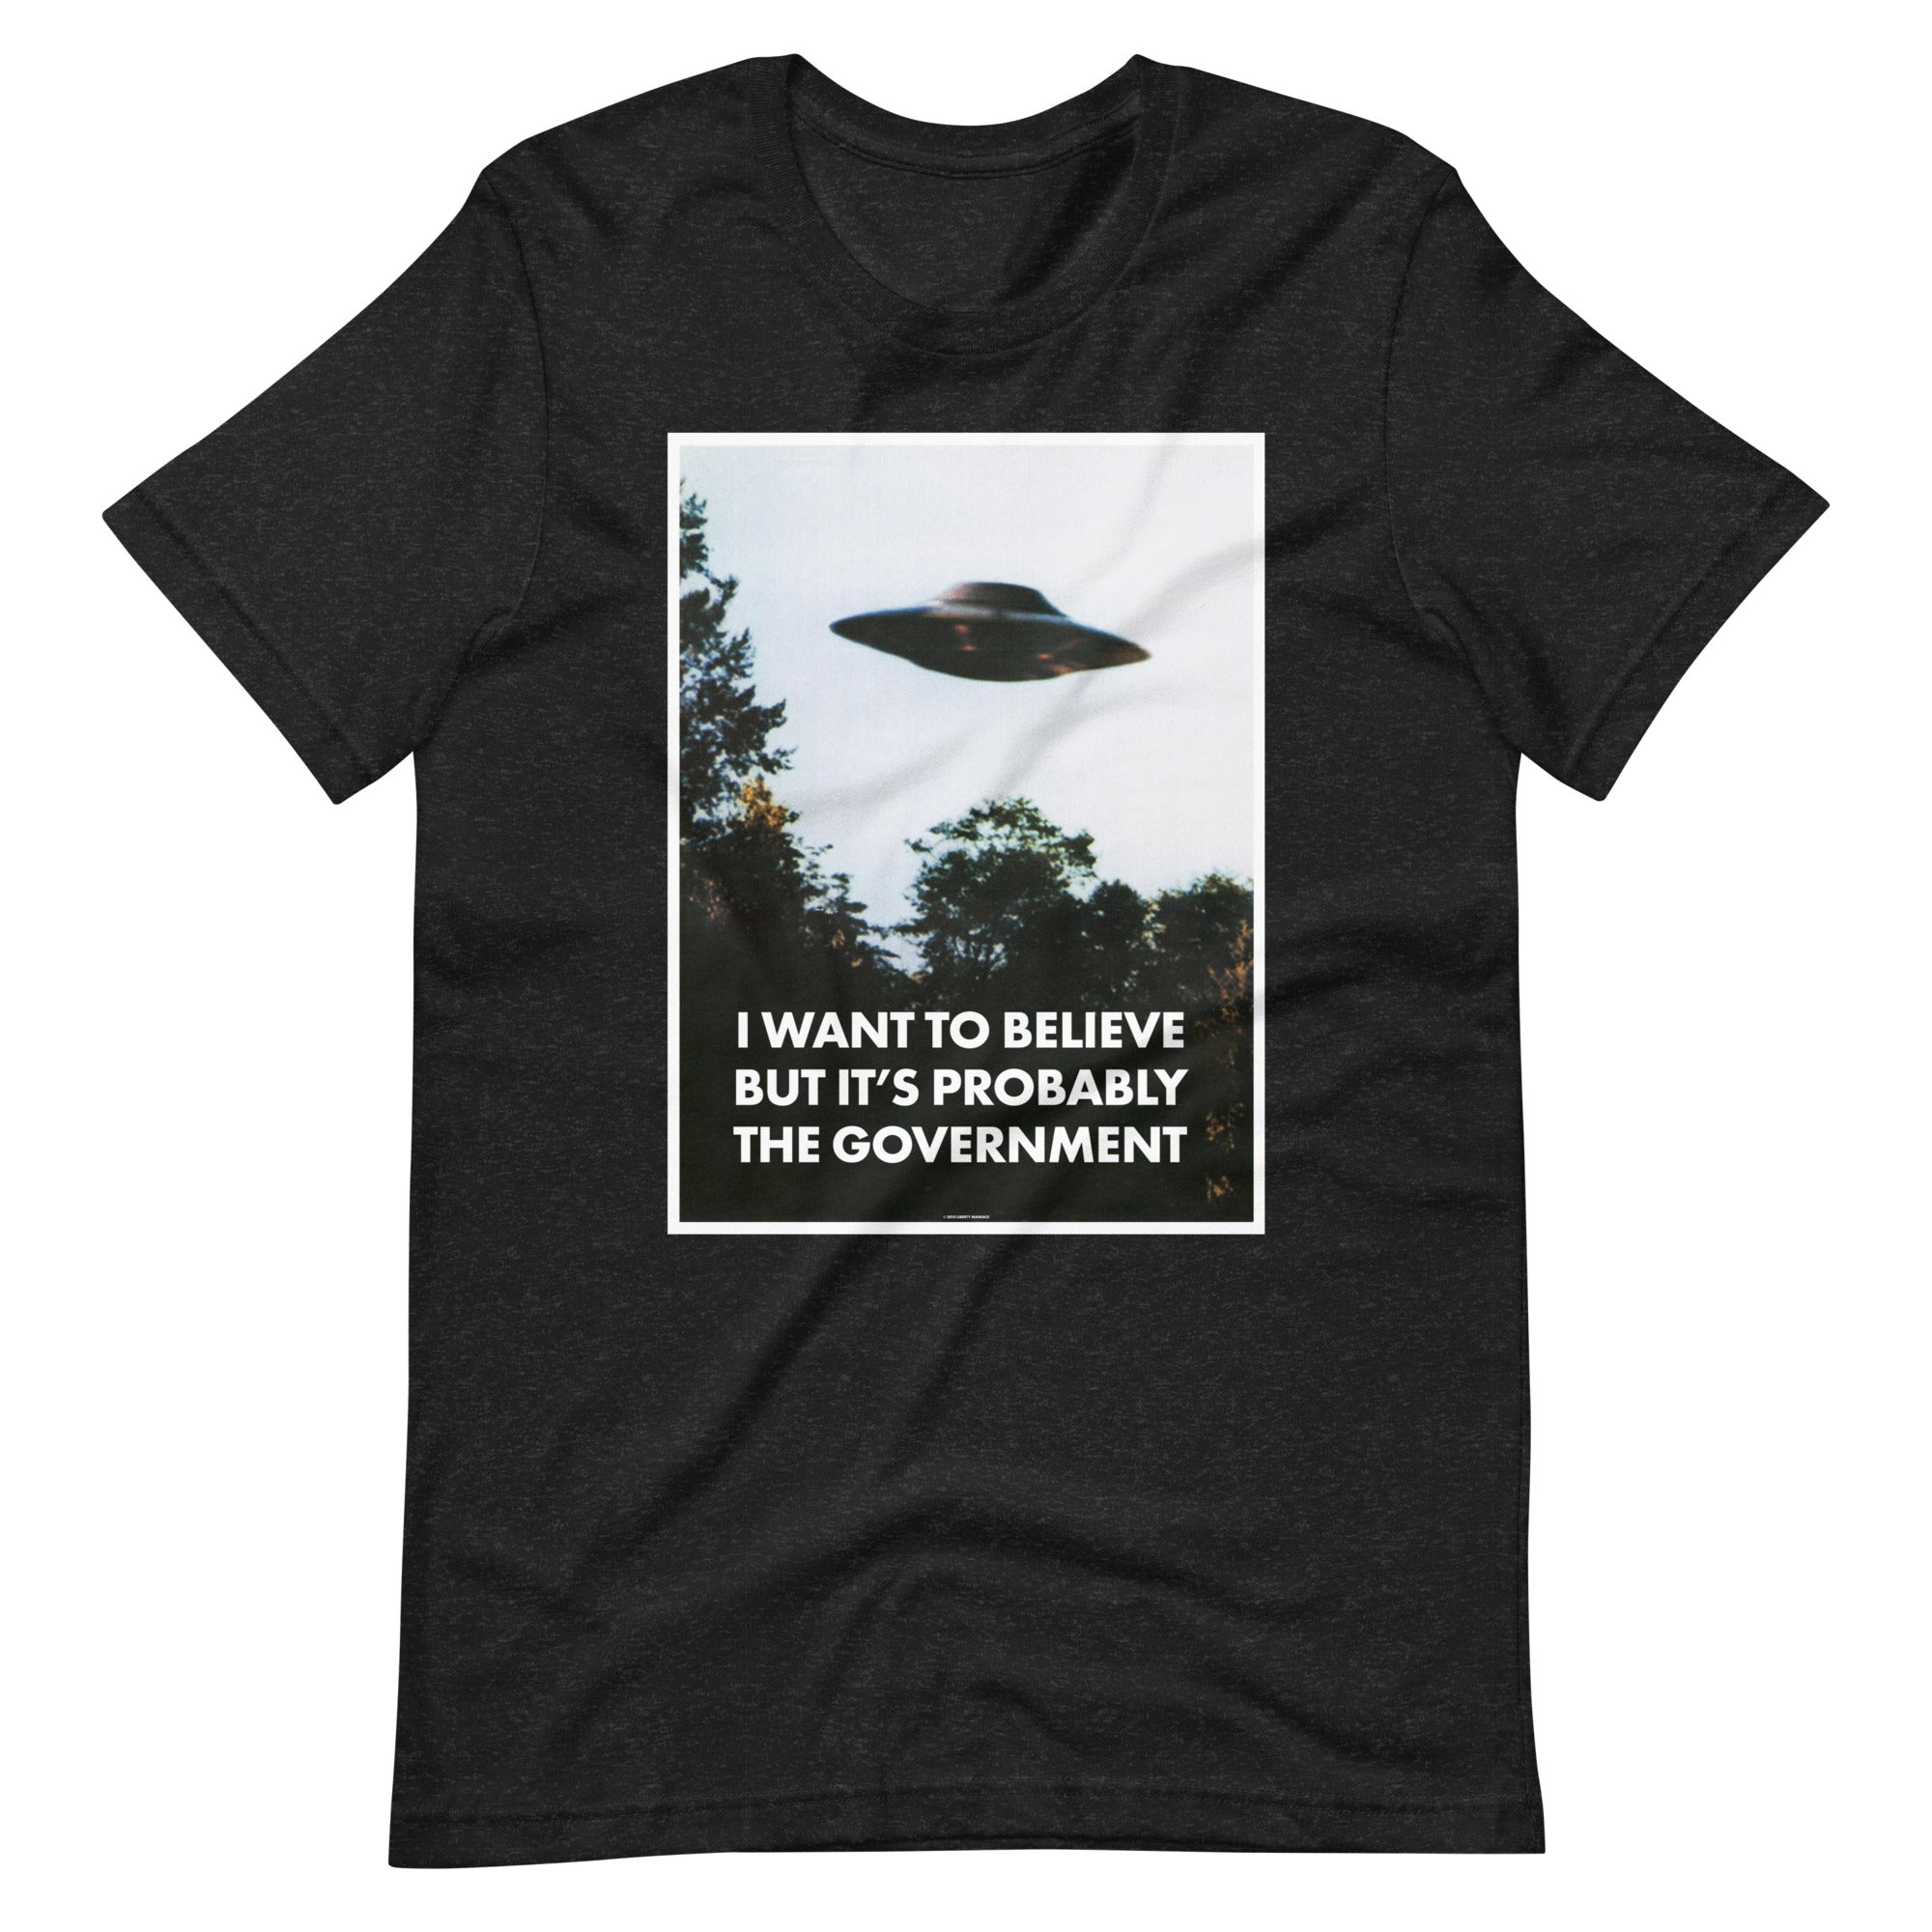 I Want To Believe But It's Probably the Government T-Shirt